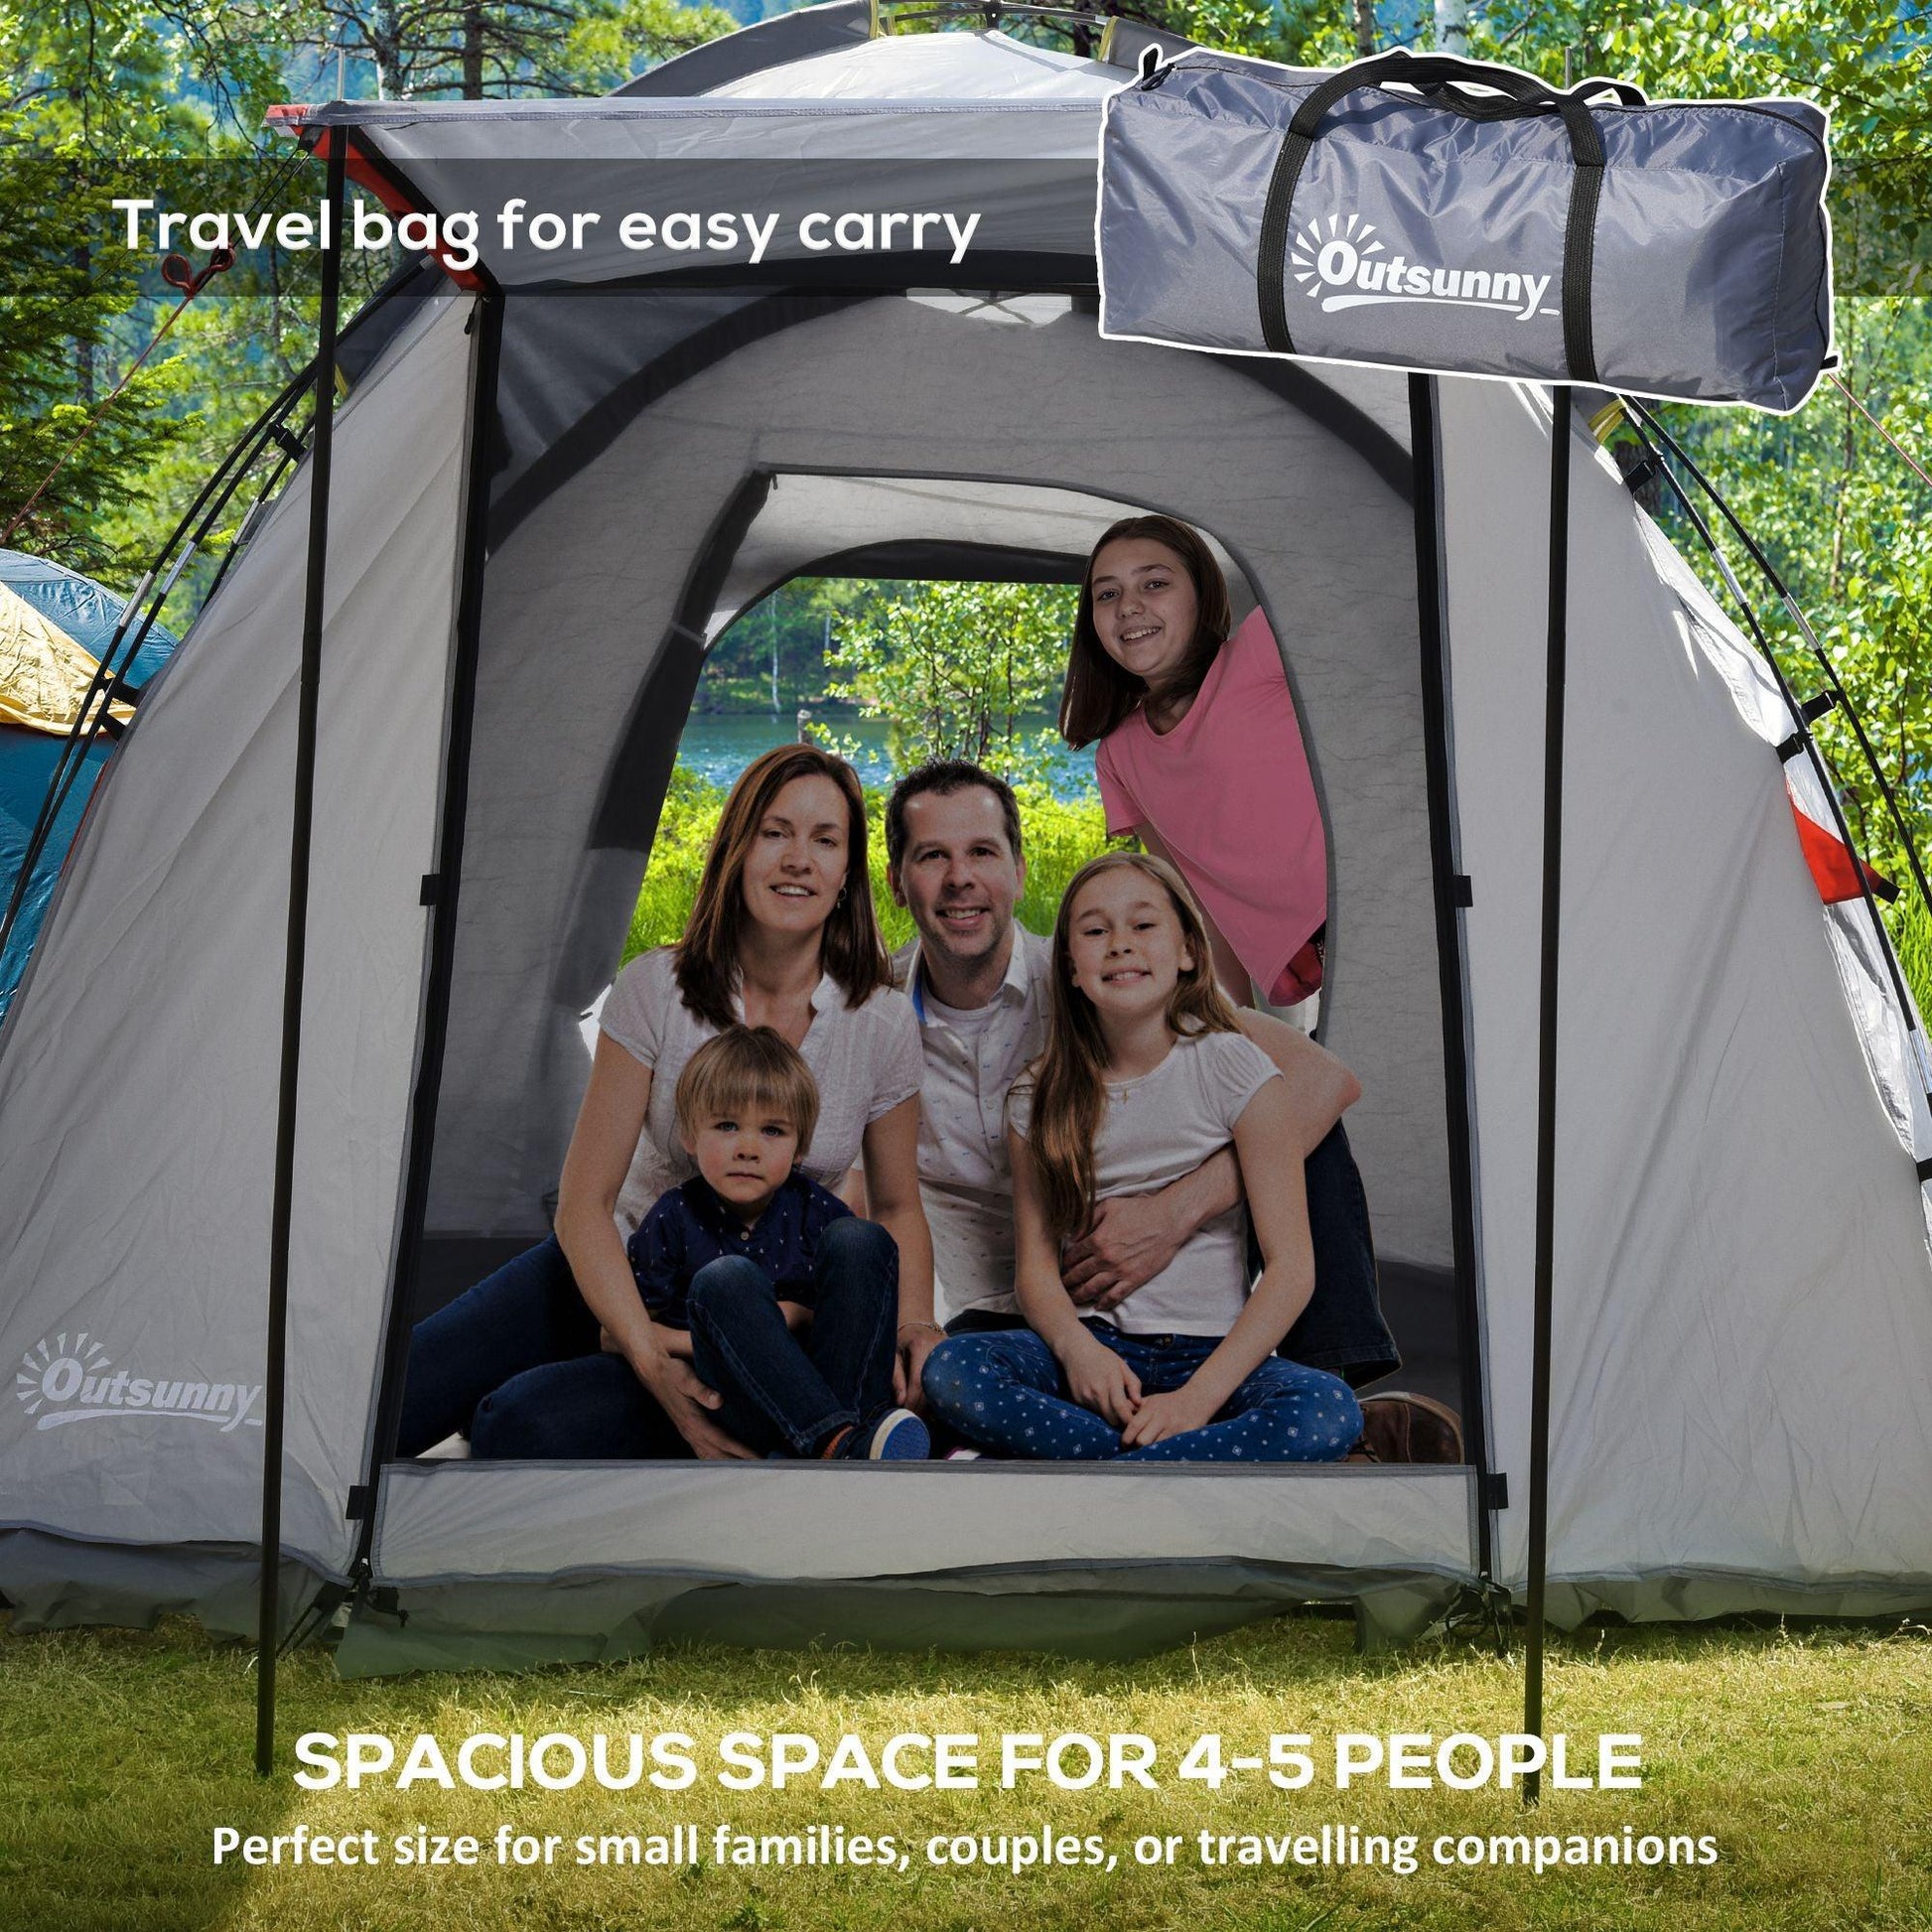 Outsunny Tunnel Tent: Portable 4-5 Person Camping Shelter - ALL4U RETAILER LTD